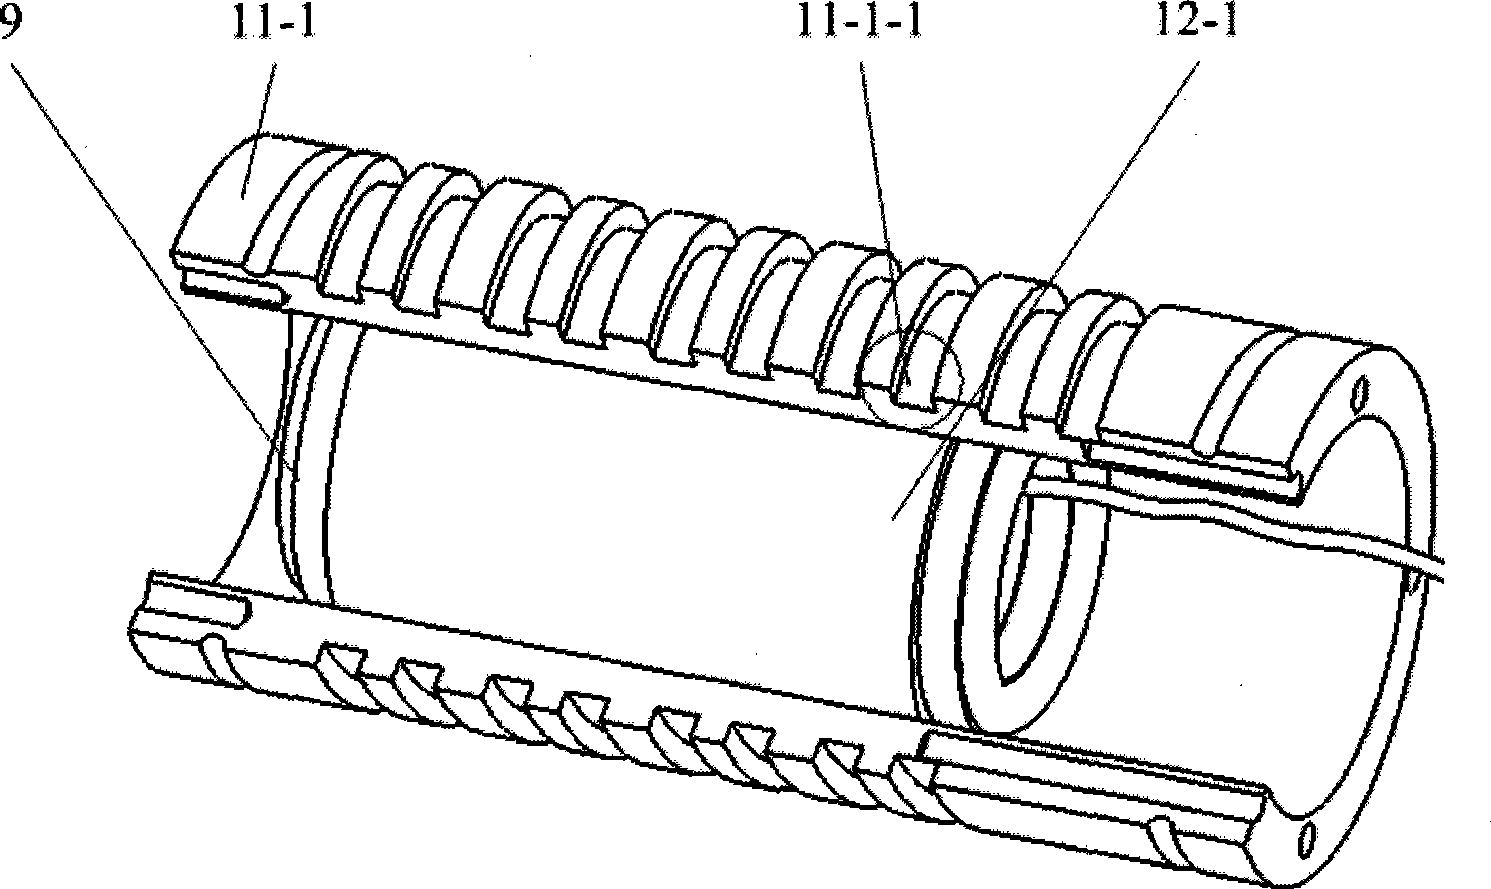 Electric principal shaft with composite stator structure